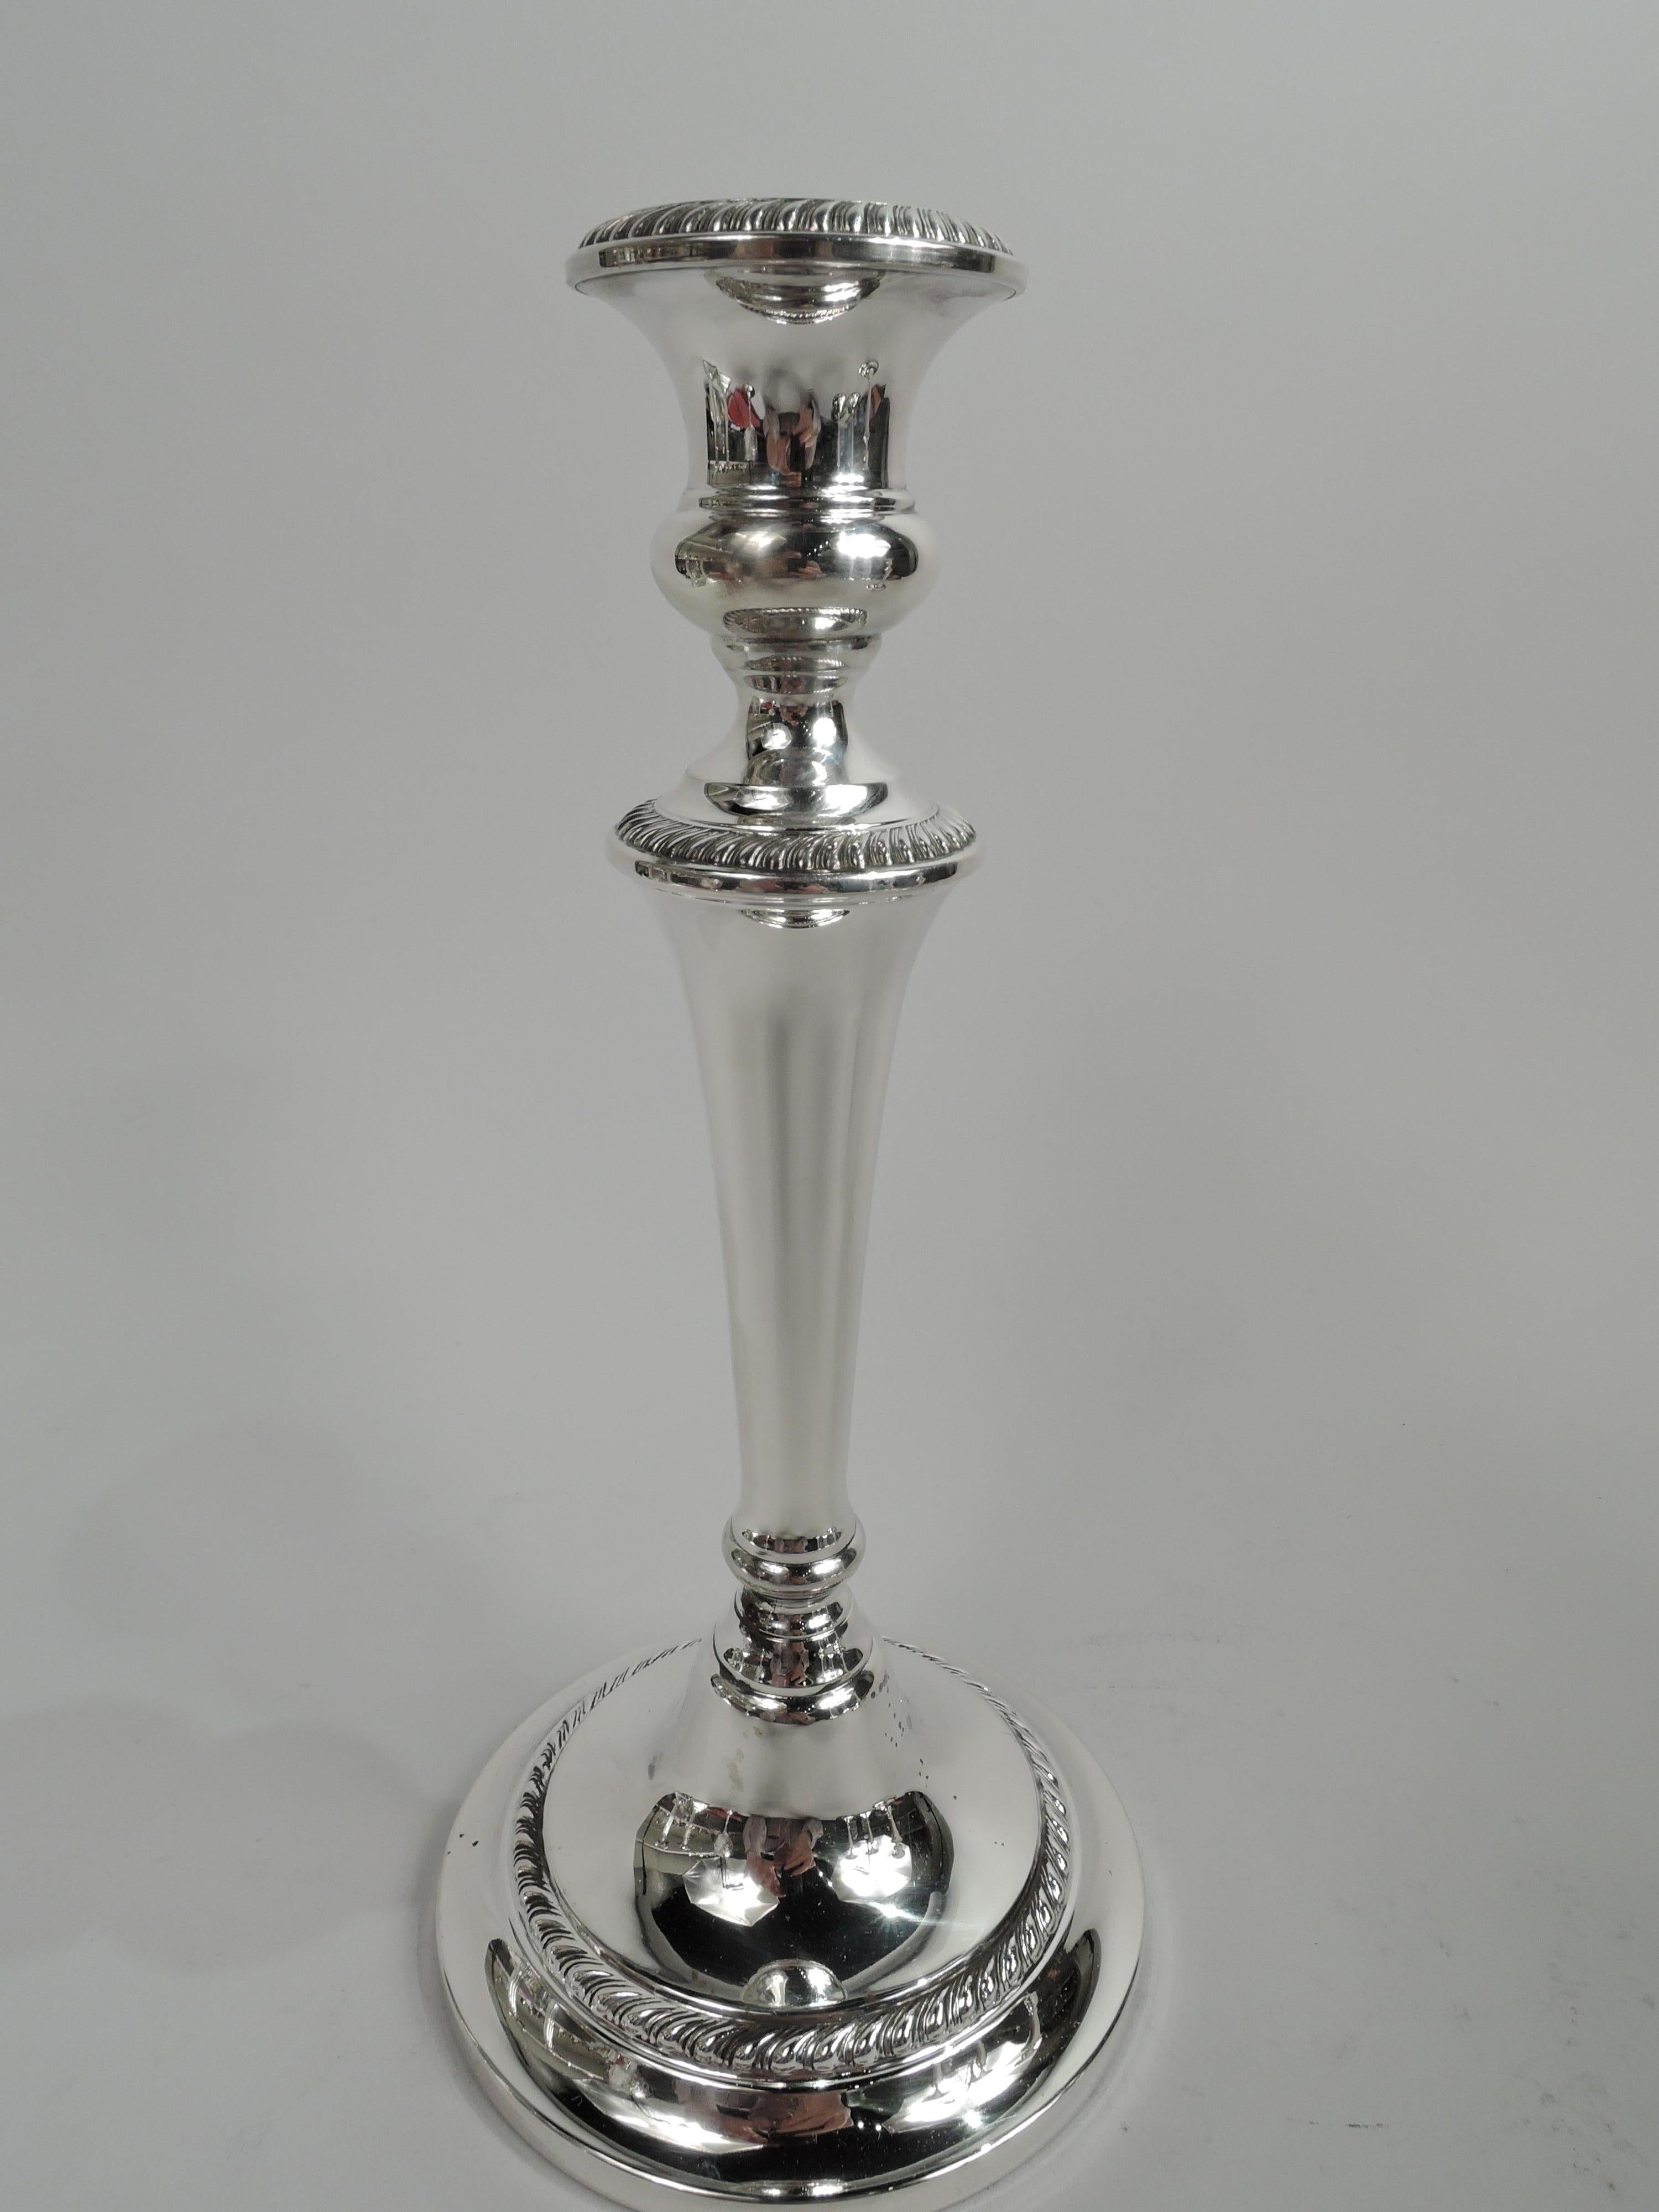 Pair of Modern Georgian sterling silver candlesticks. Made by Gorham in Providence. Each: Bellied socket on tapering columnar shaft with base knop and domed foot. Gadrooning. Fully marked including maker’s stamp and no. 670. Weighted.